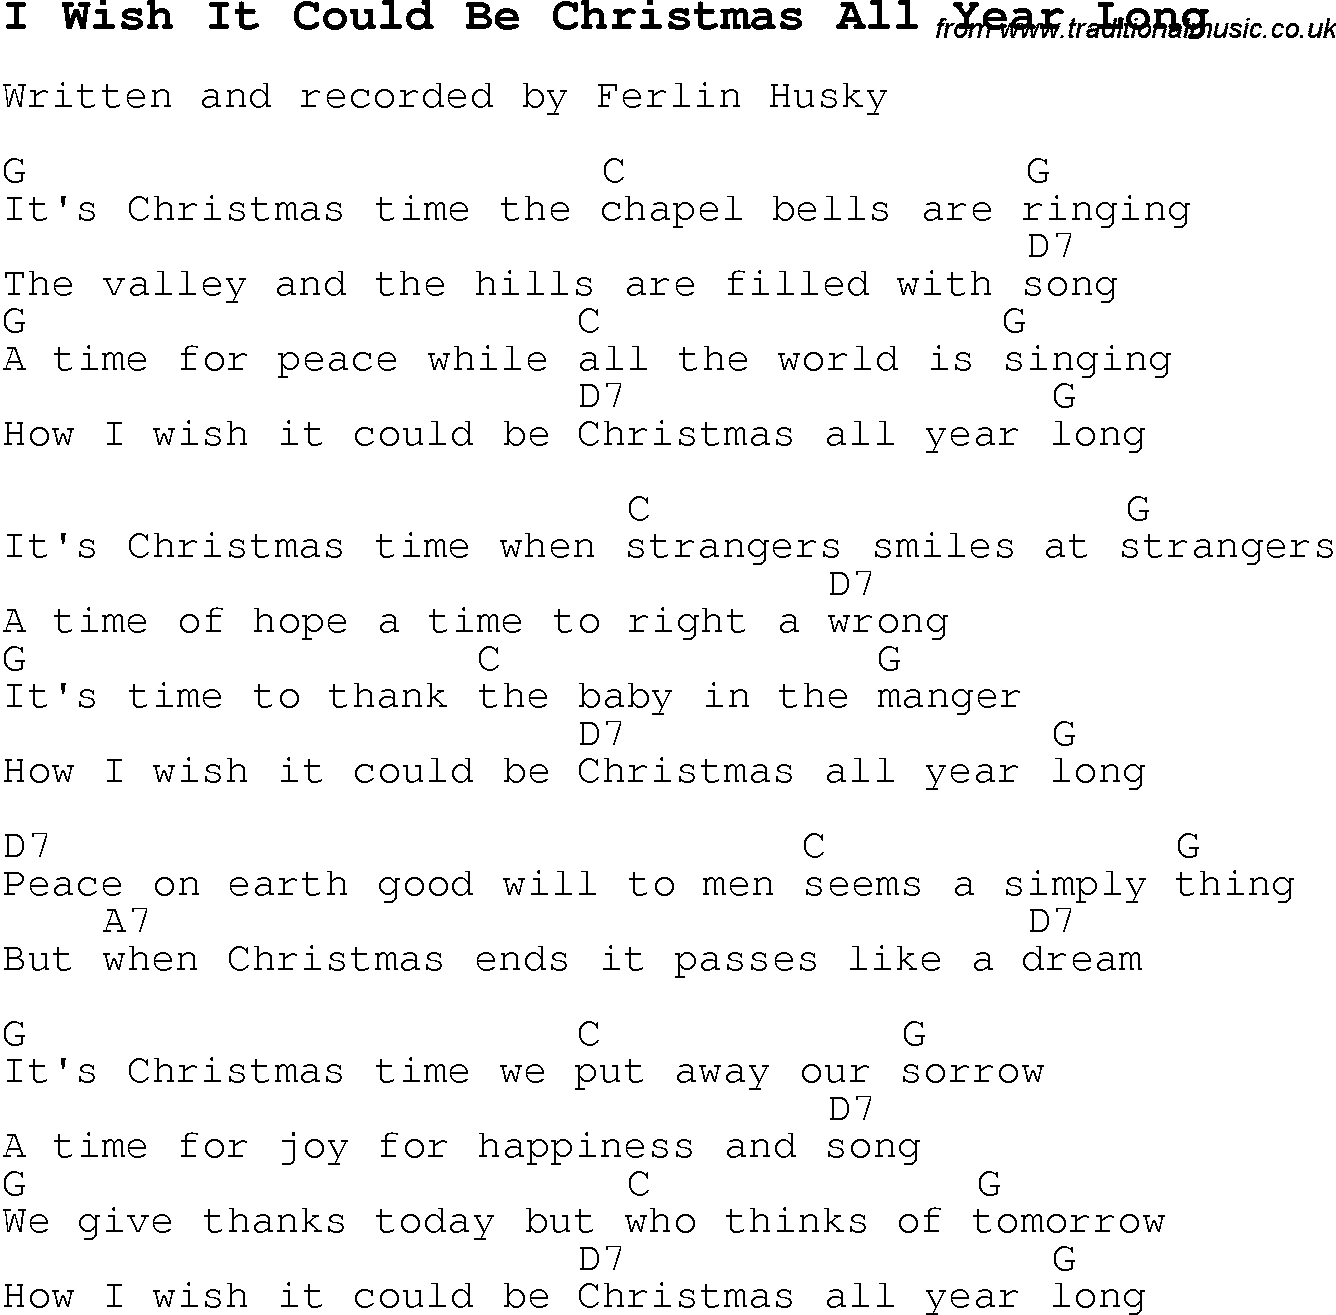 Christmas Carol/Song lyrics with chords for I Wish It Could Be Christmas All Year Long